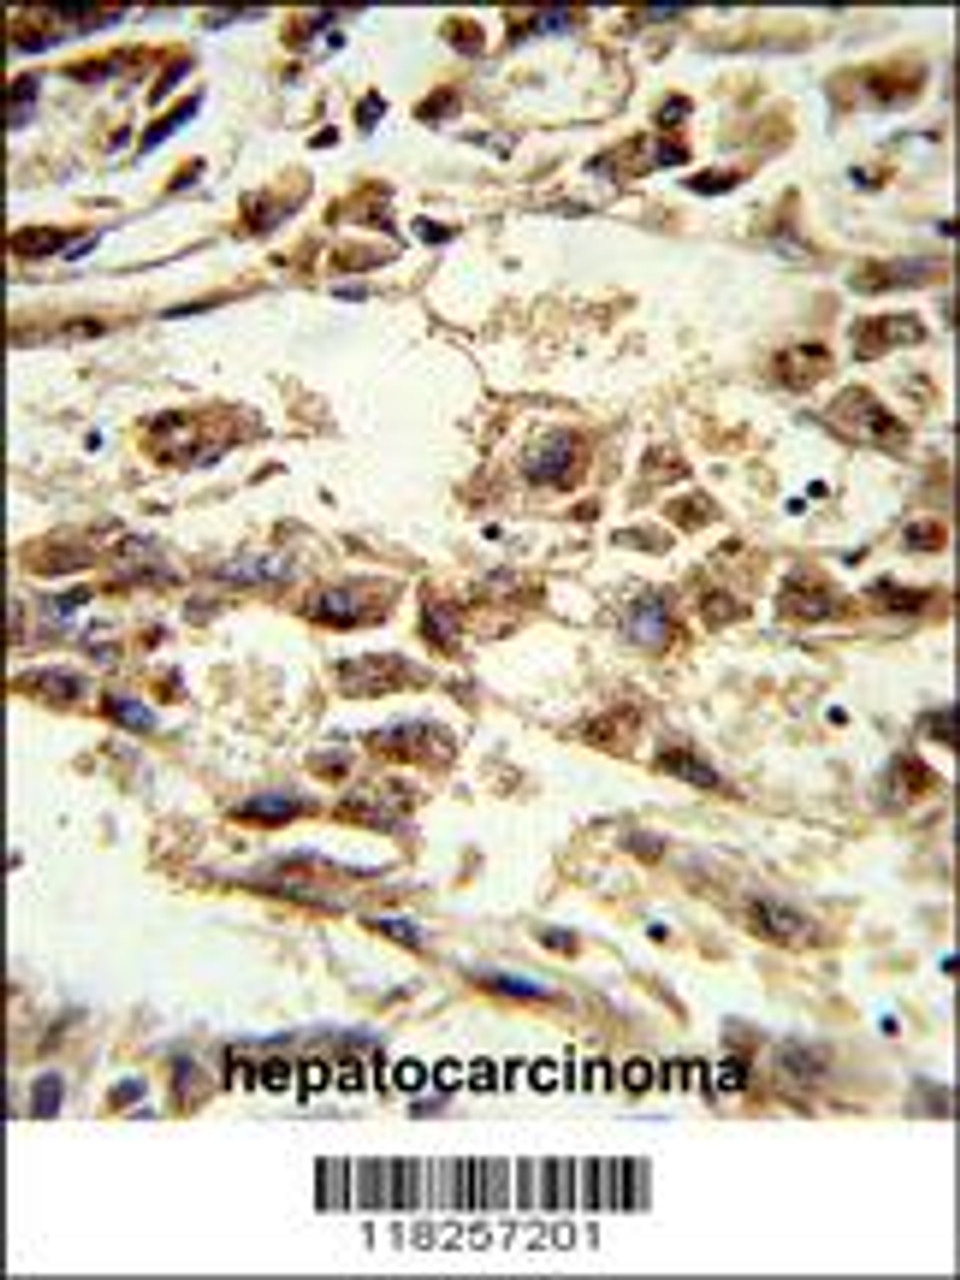 Formalin-fixed and paraffin-embedded human hepatocarcinoma reacted with AIFM2 Antibody, which was peroxidase-conjugated to the secondary antibody, followed by DAB staining.